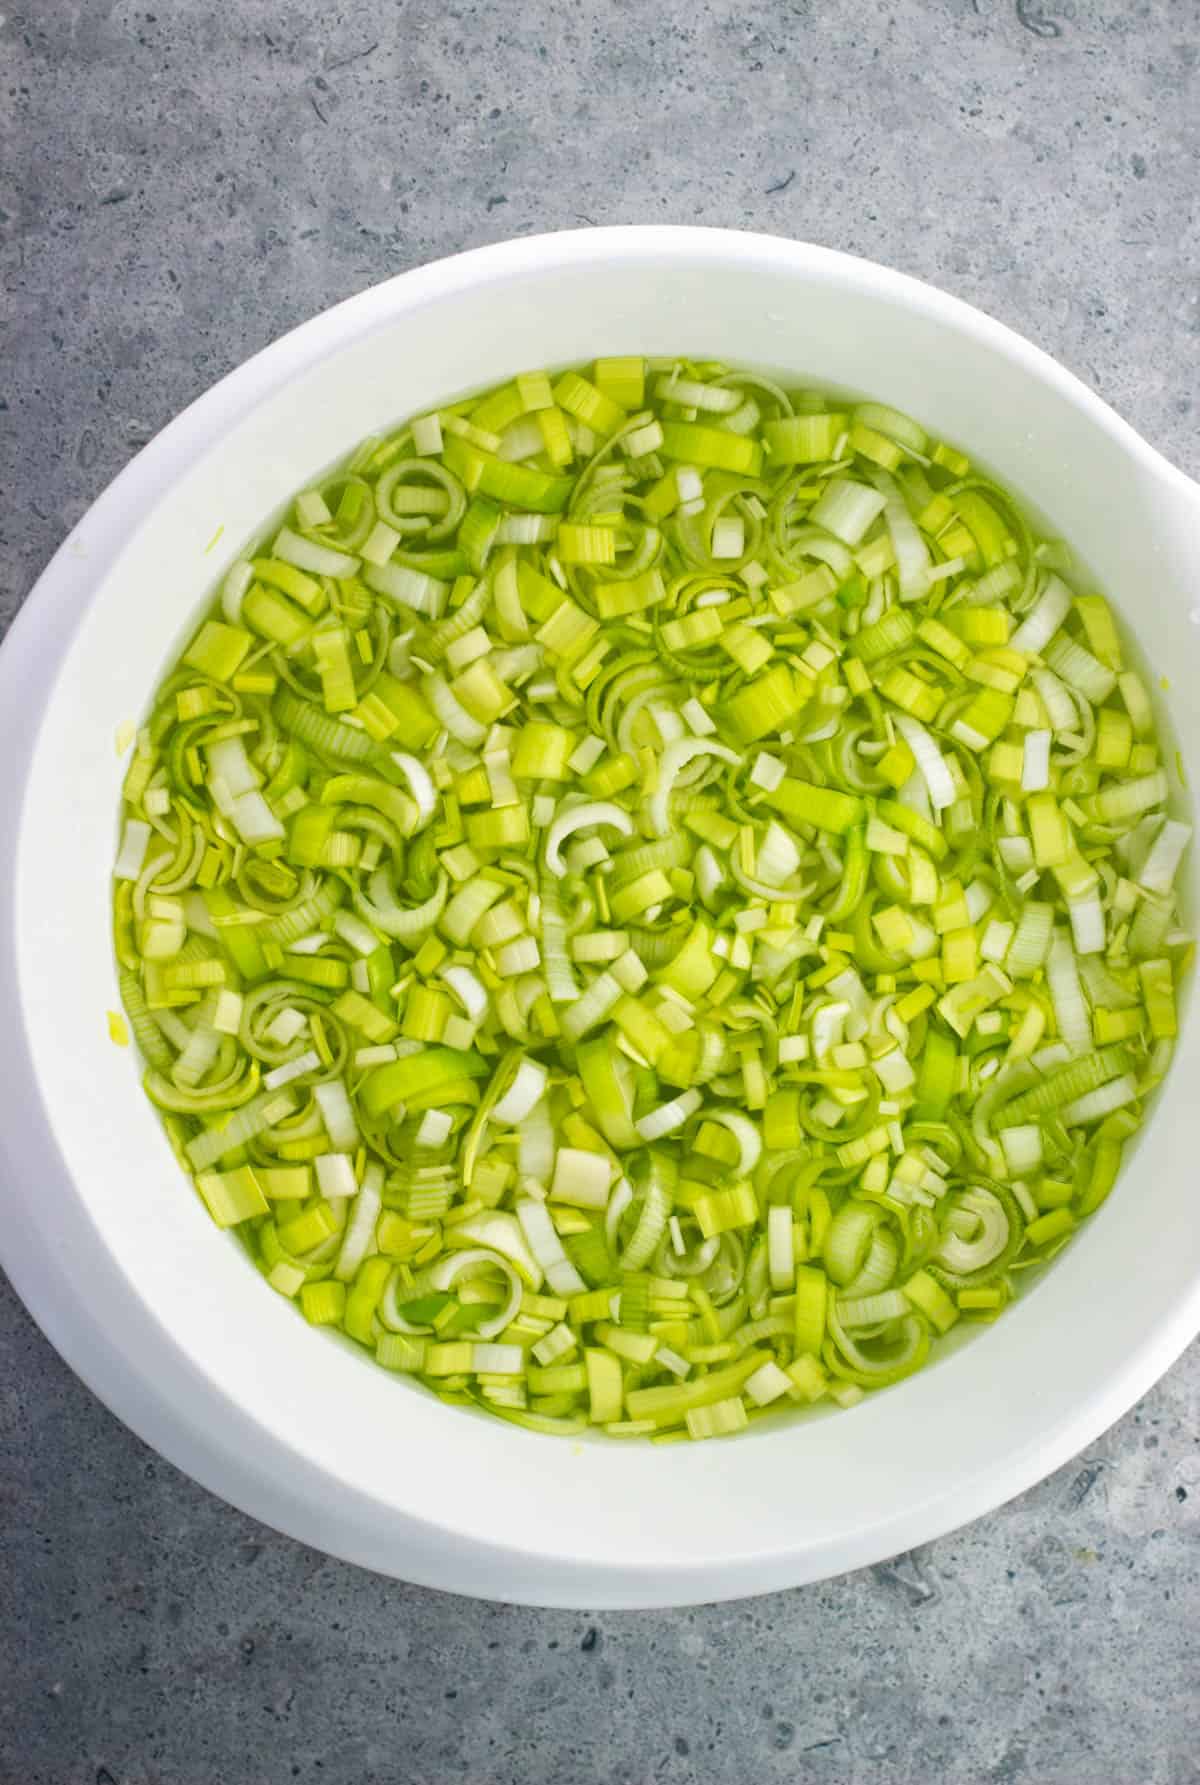 Sliced leeks in a large bowl of water.